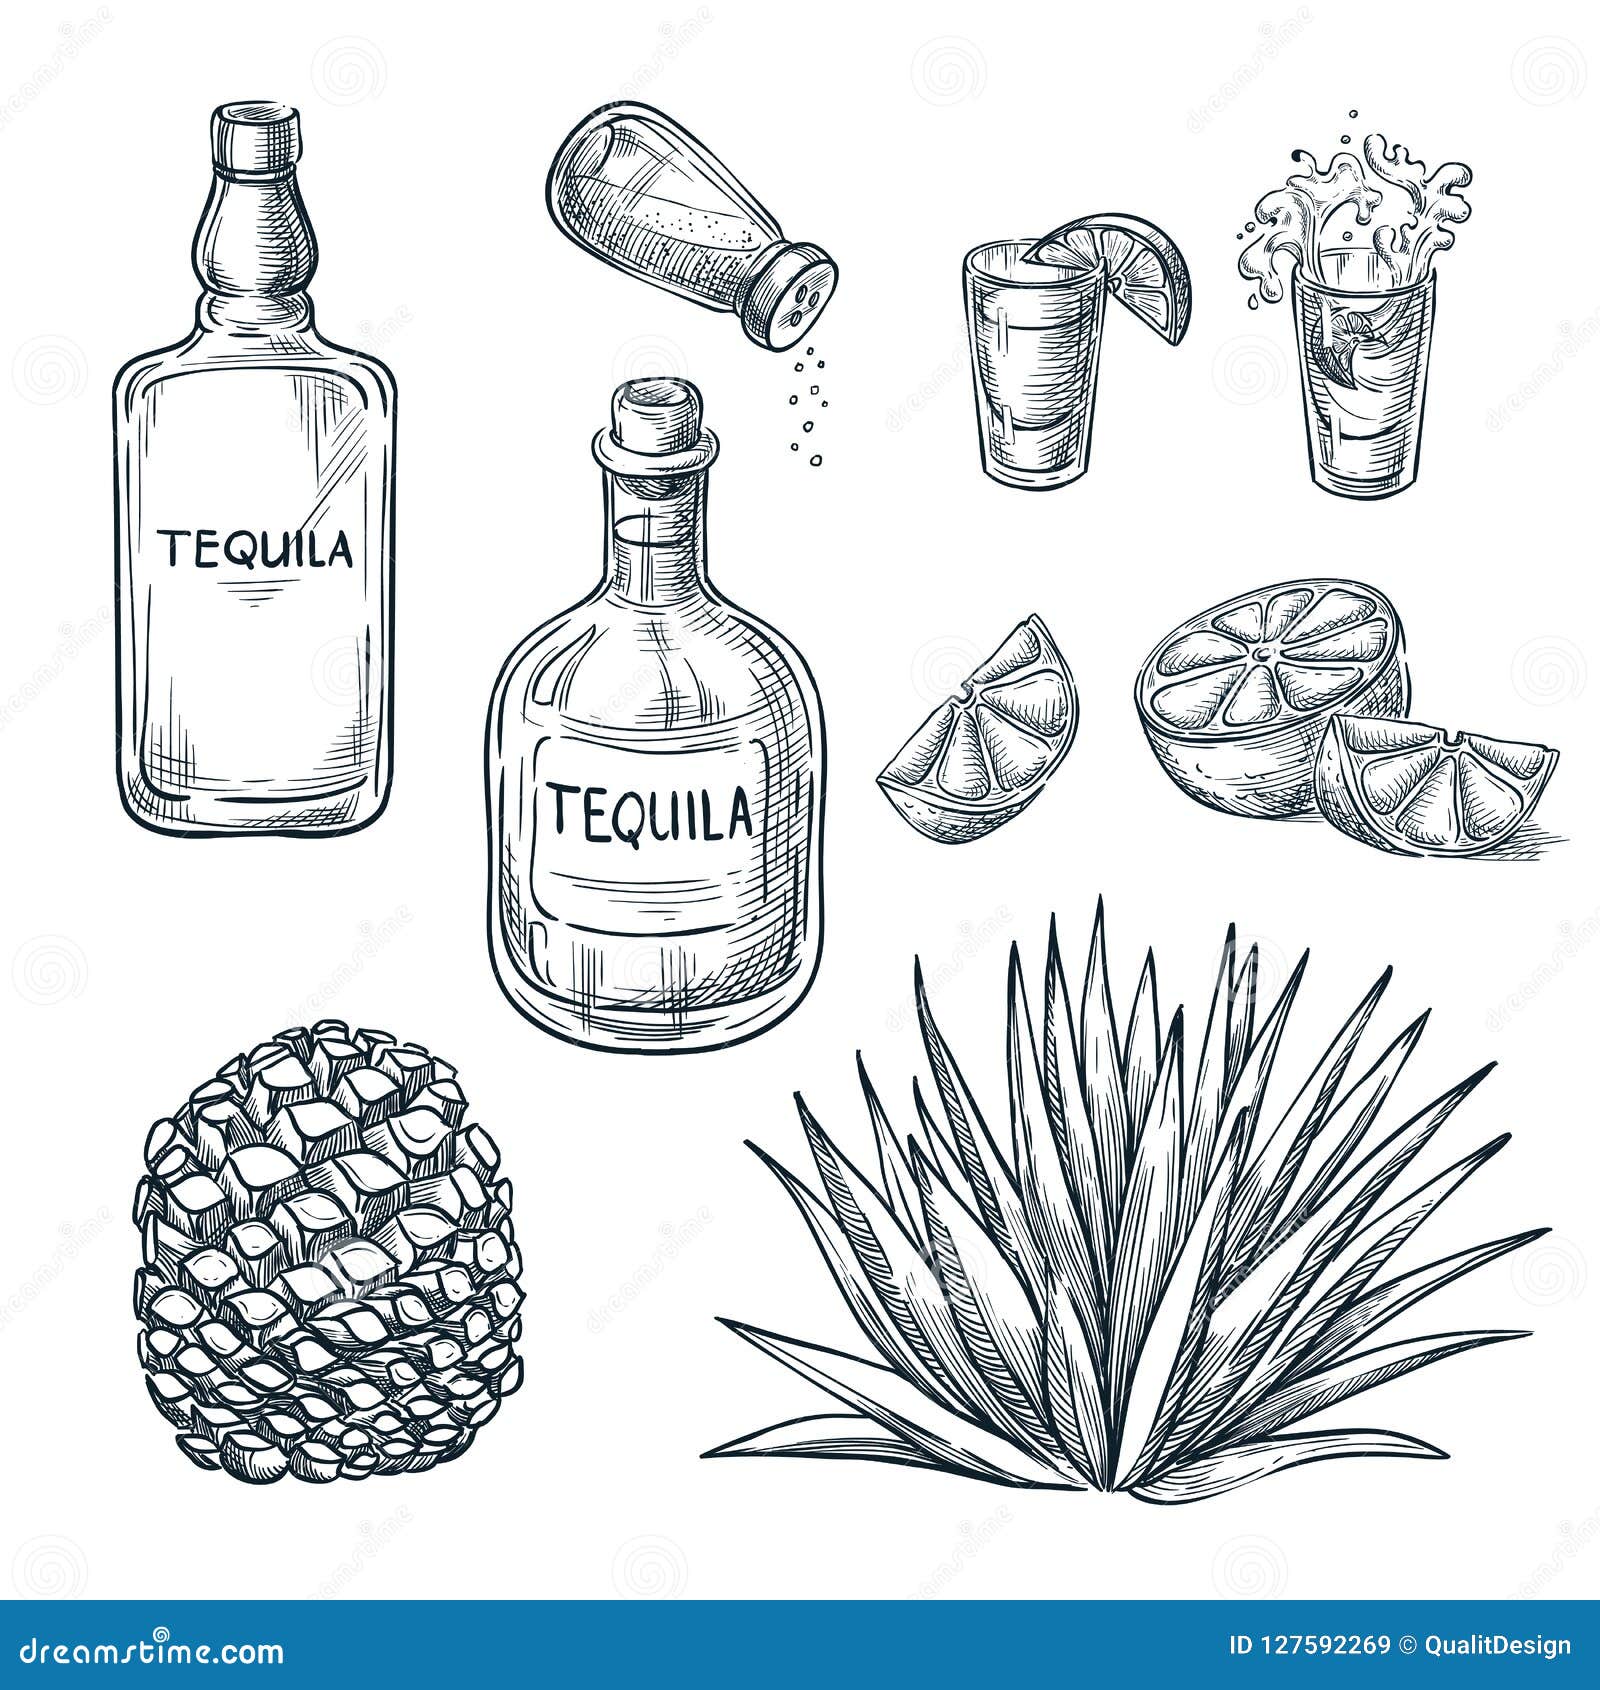 tequila bottle, shot glass and ingredients,  sketch. mexican alcohol drinks. agave plant and root.